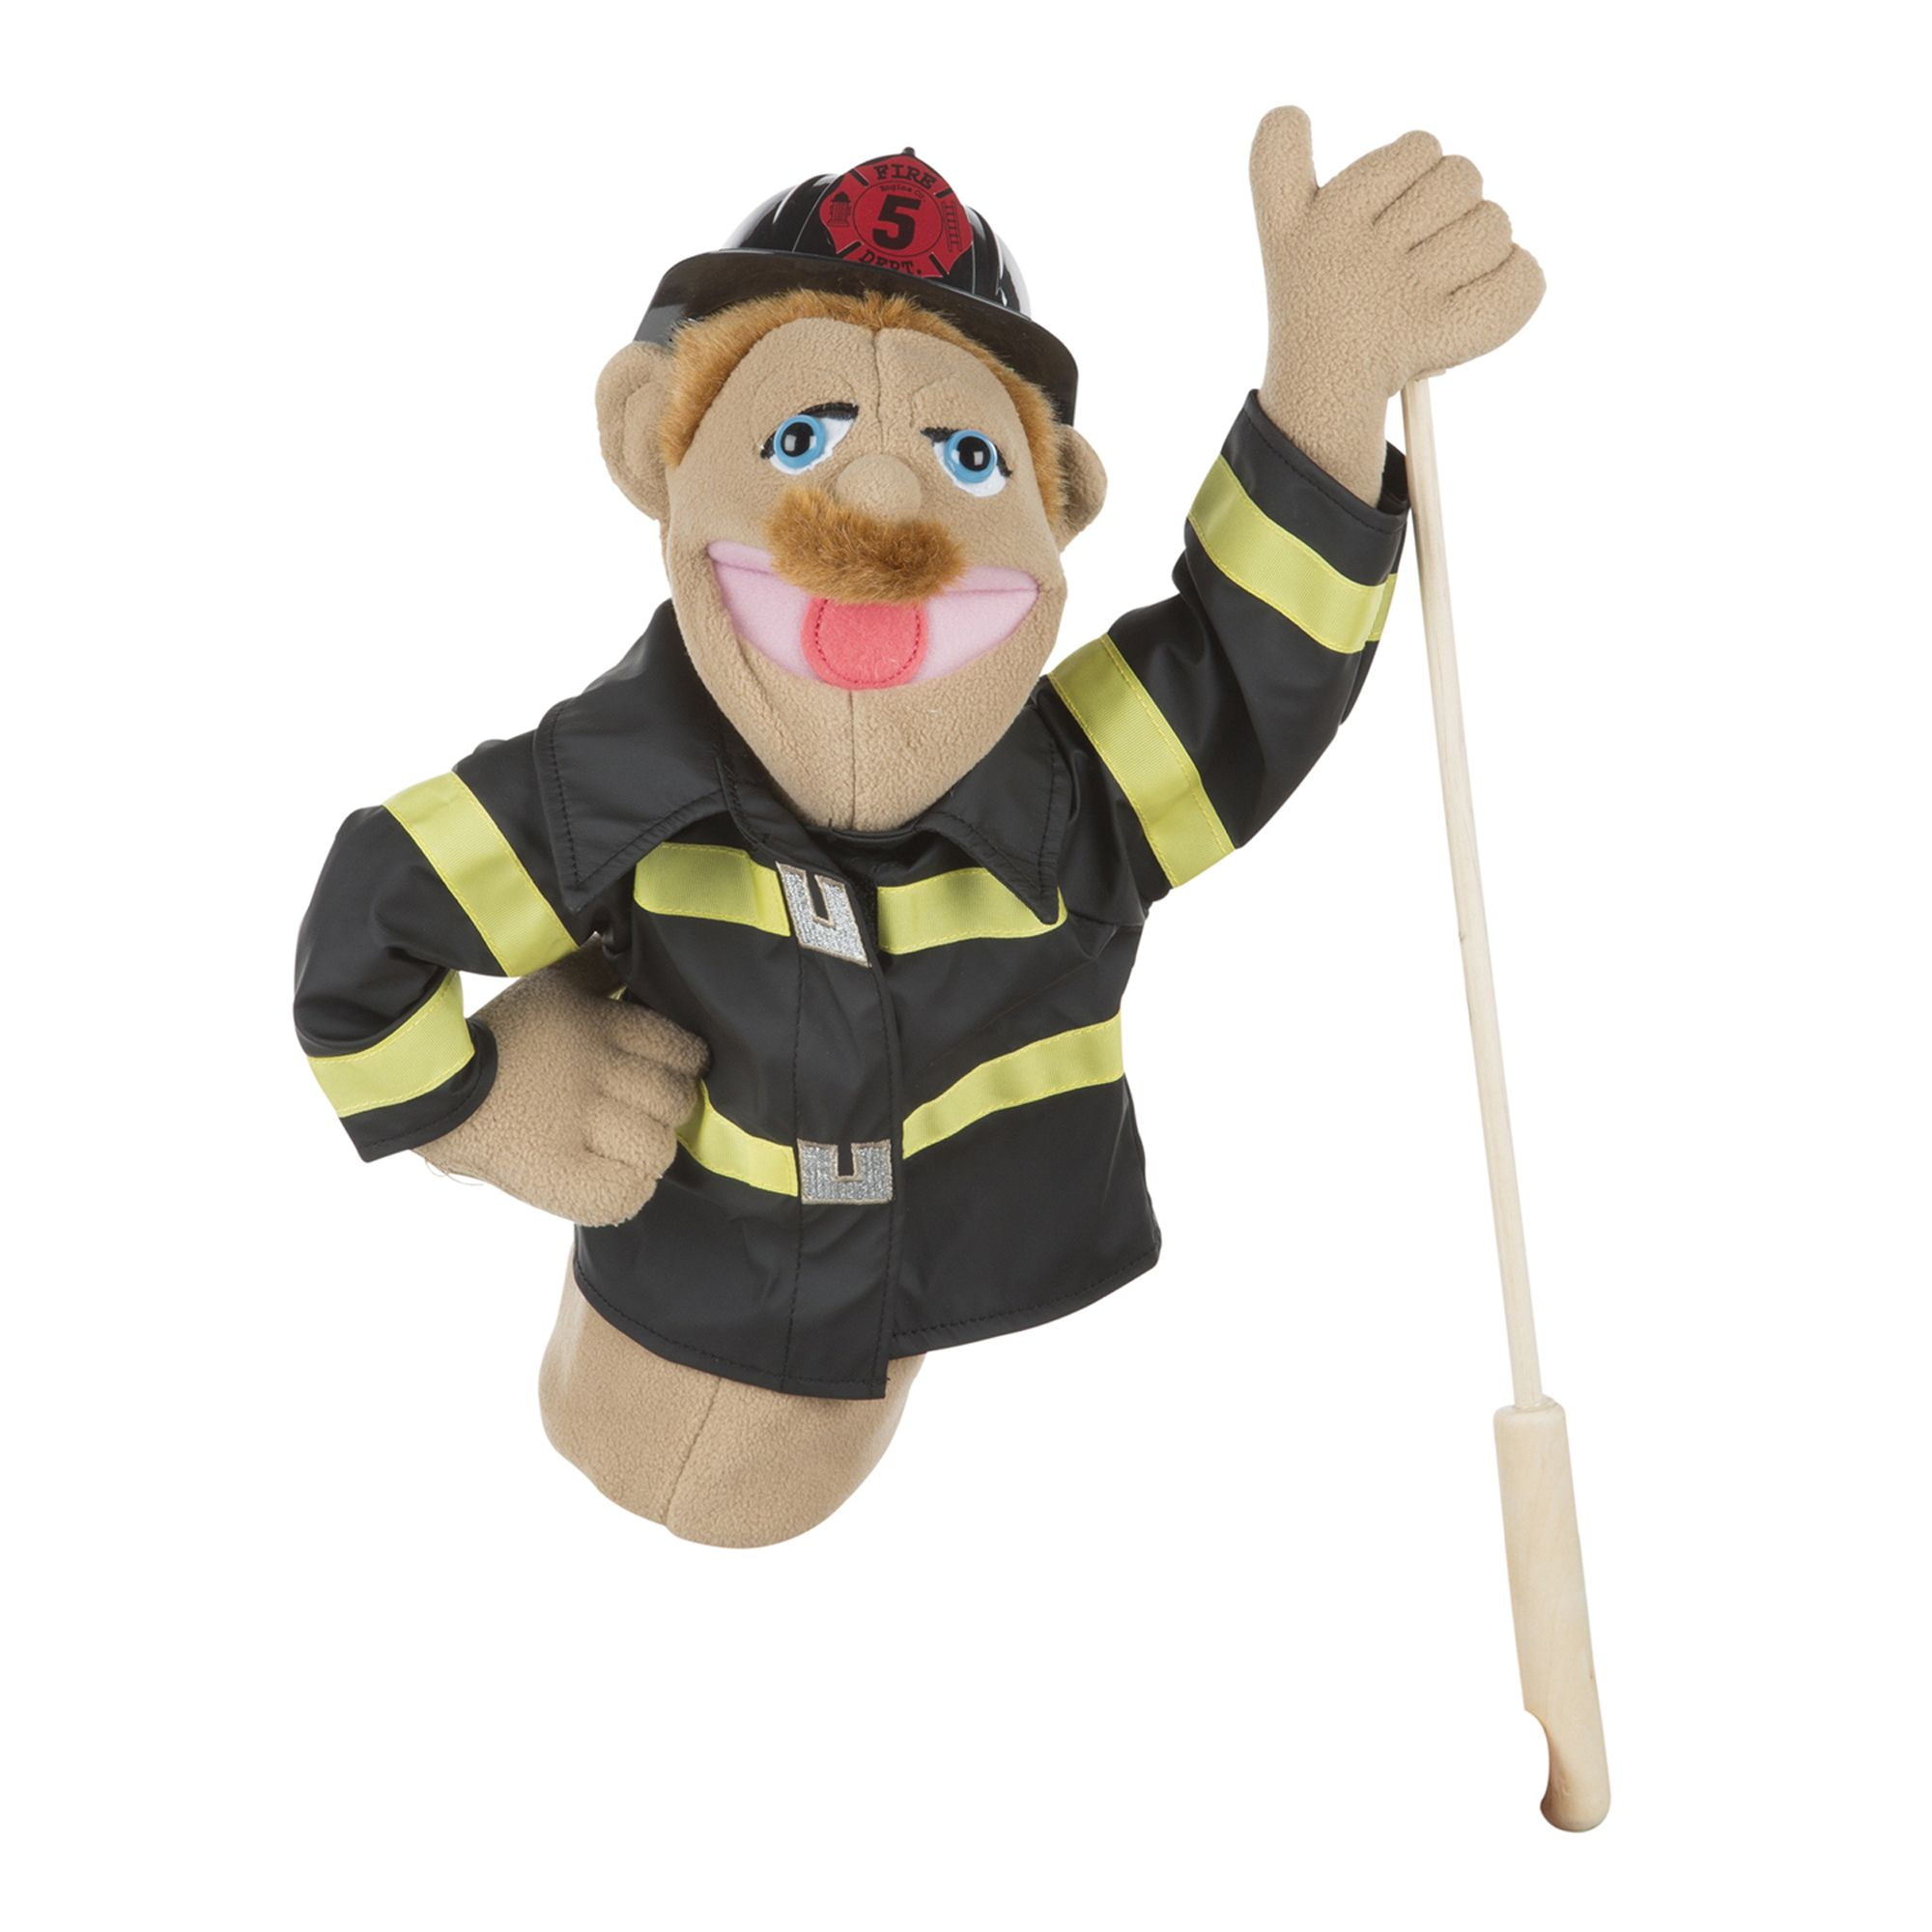 Melissa & Doug Rescue Puppet Set - Police Officer and Firefighter - Soft,  Plush Puppets For Kids Ages 3+